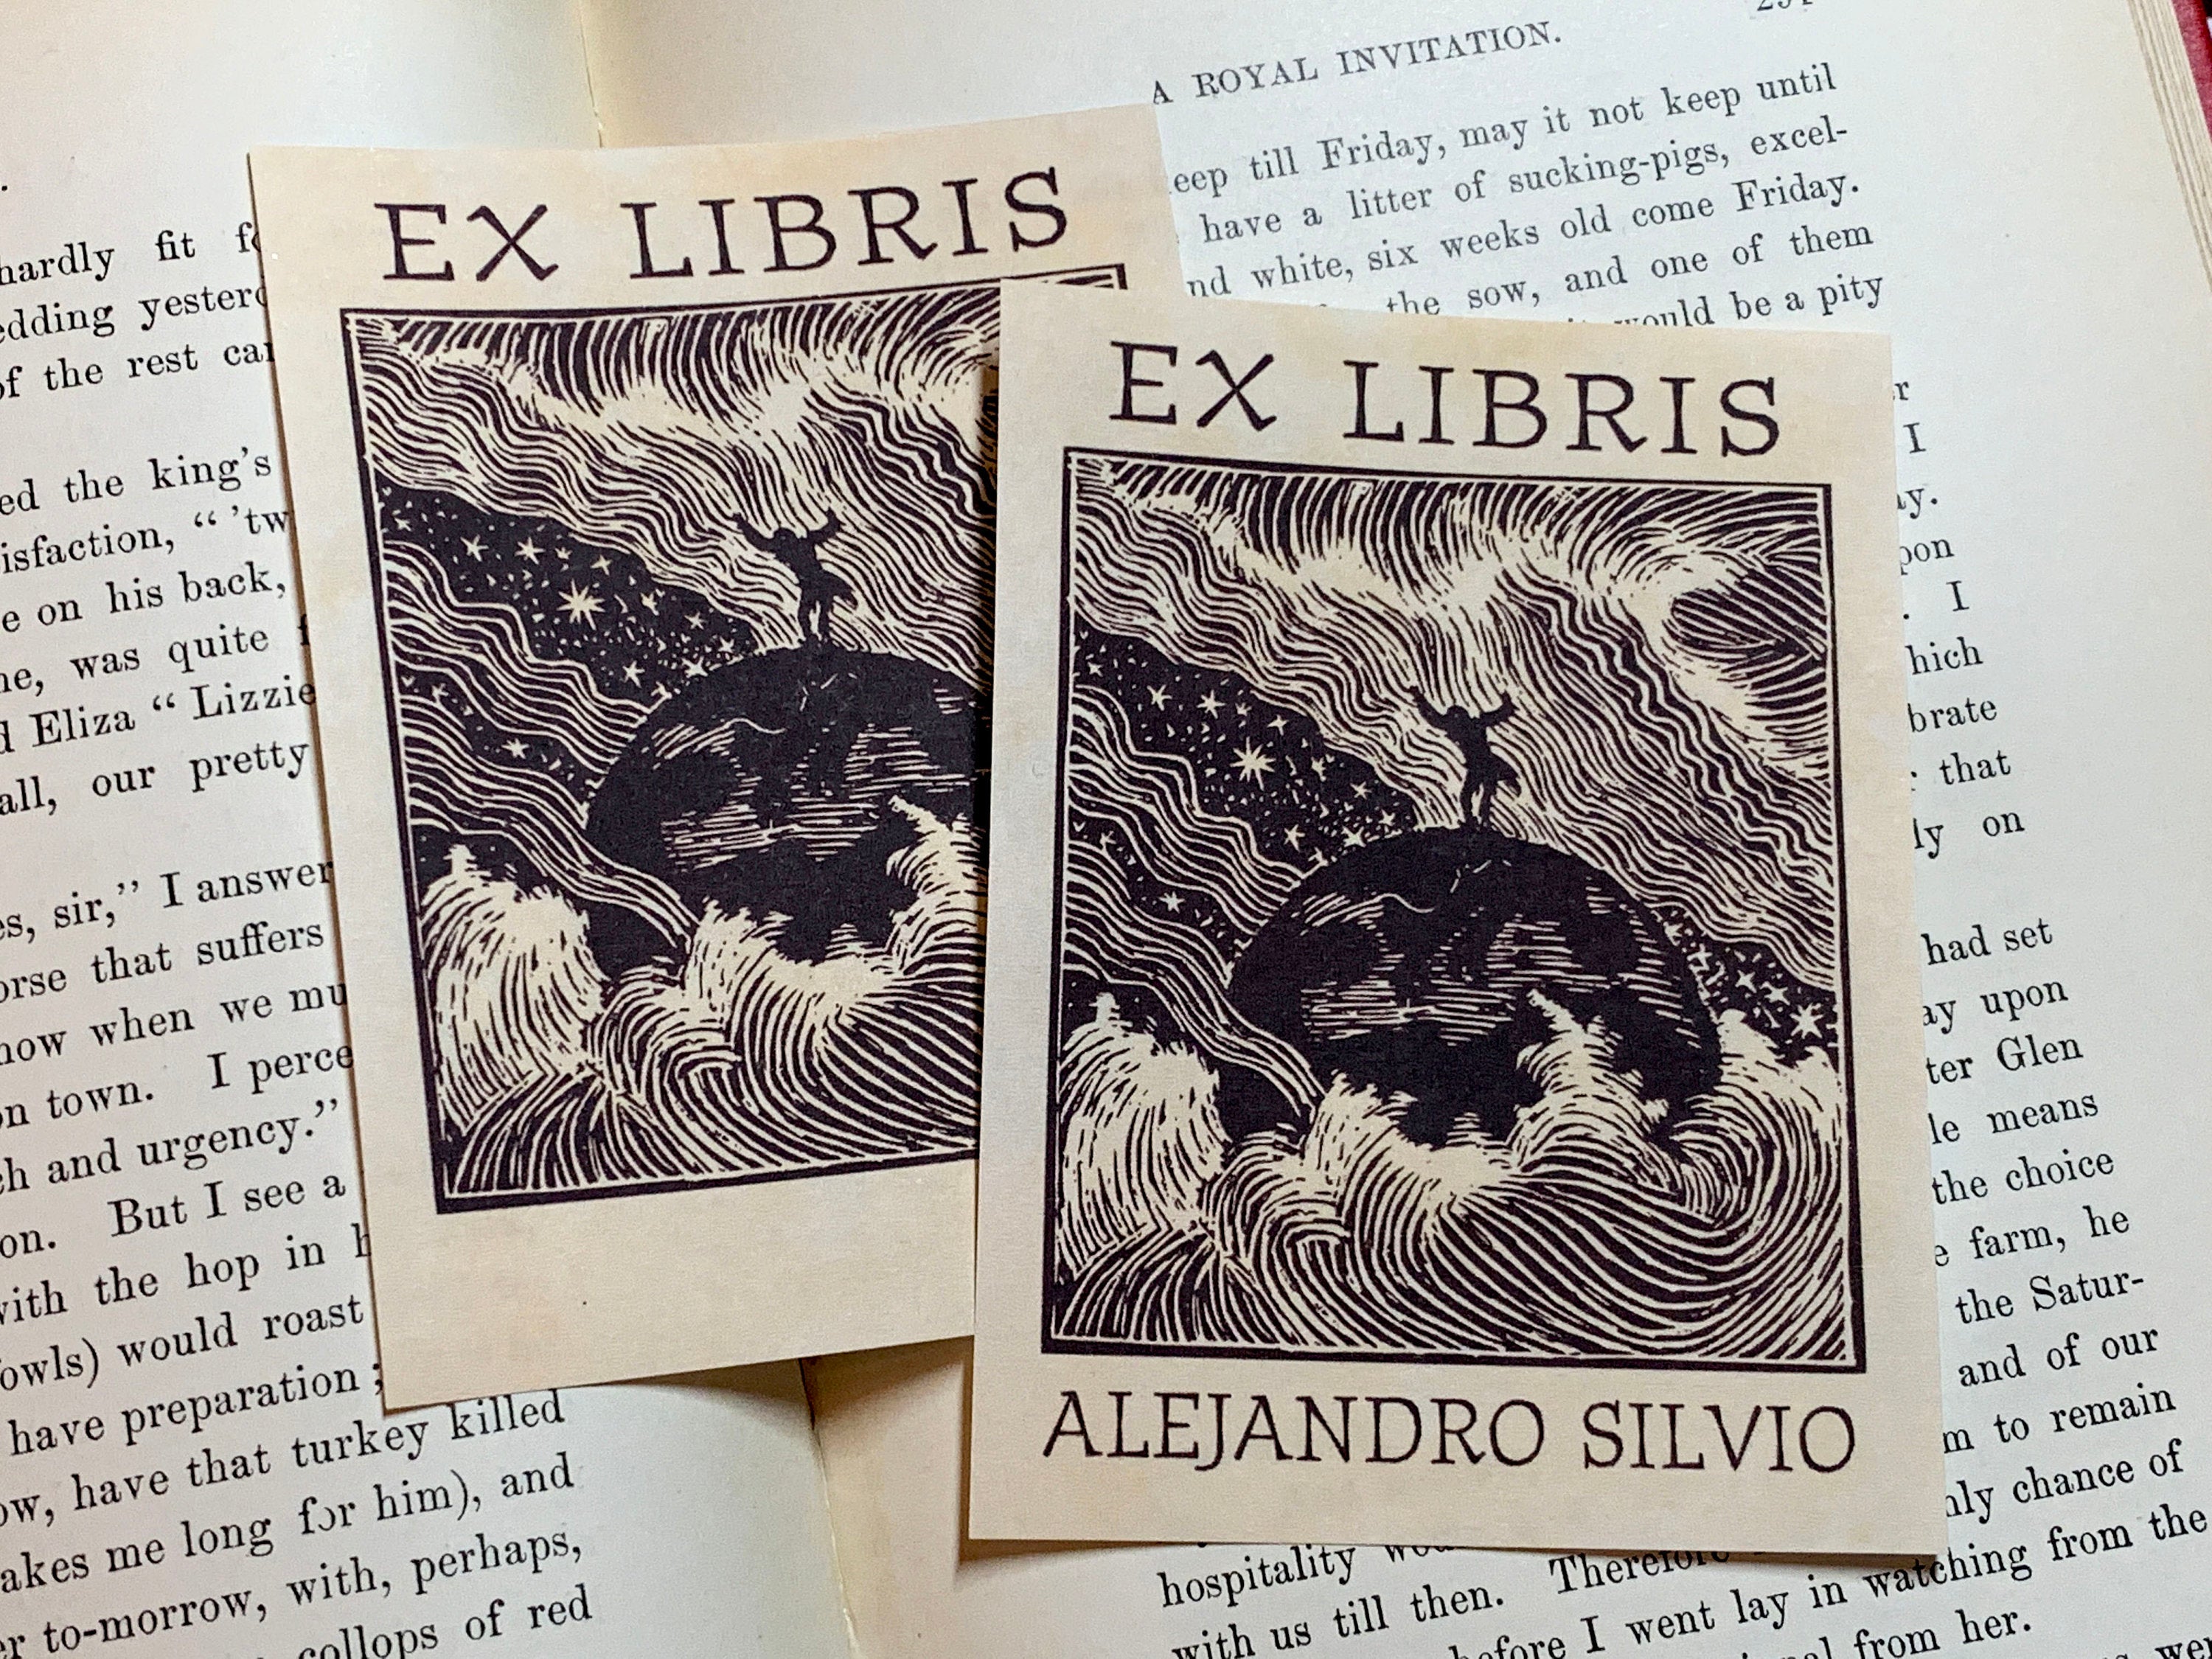 On Top of the World, Personalized Ex-Libris Bookplates, Crafted on Traditional Gummed Paper, 3in x 4in, Set of 30